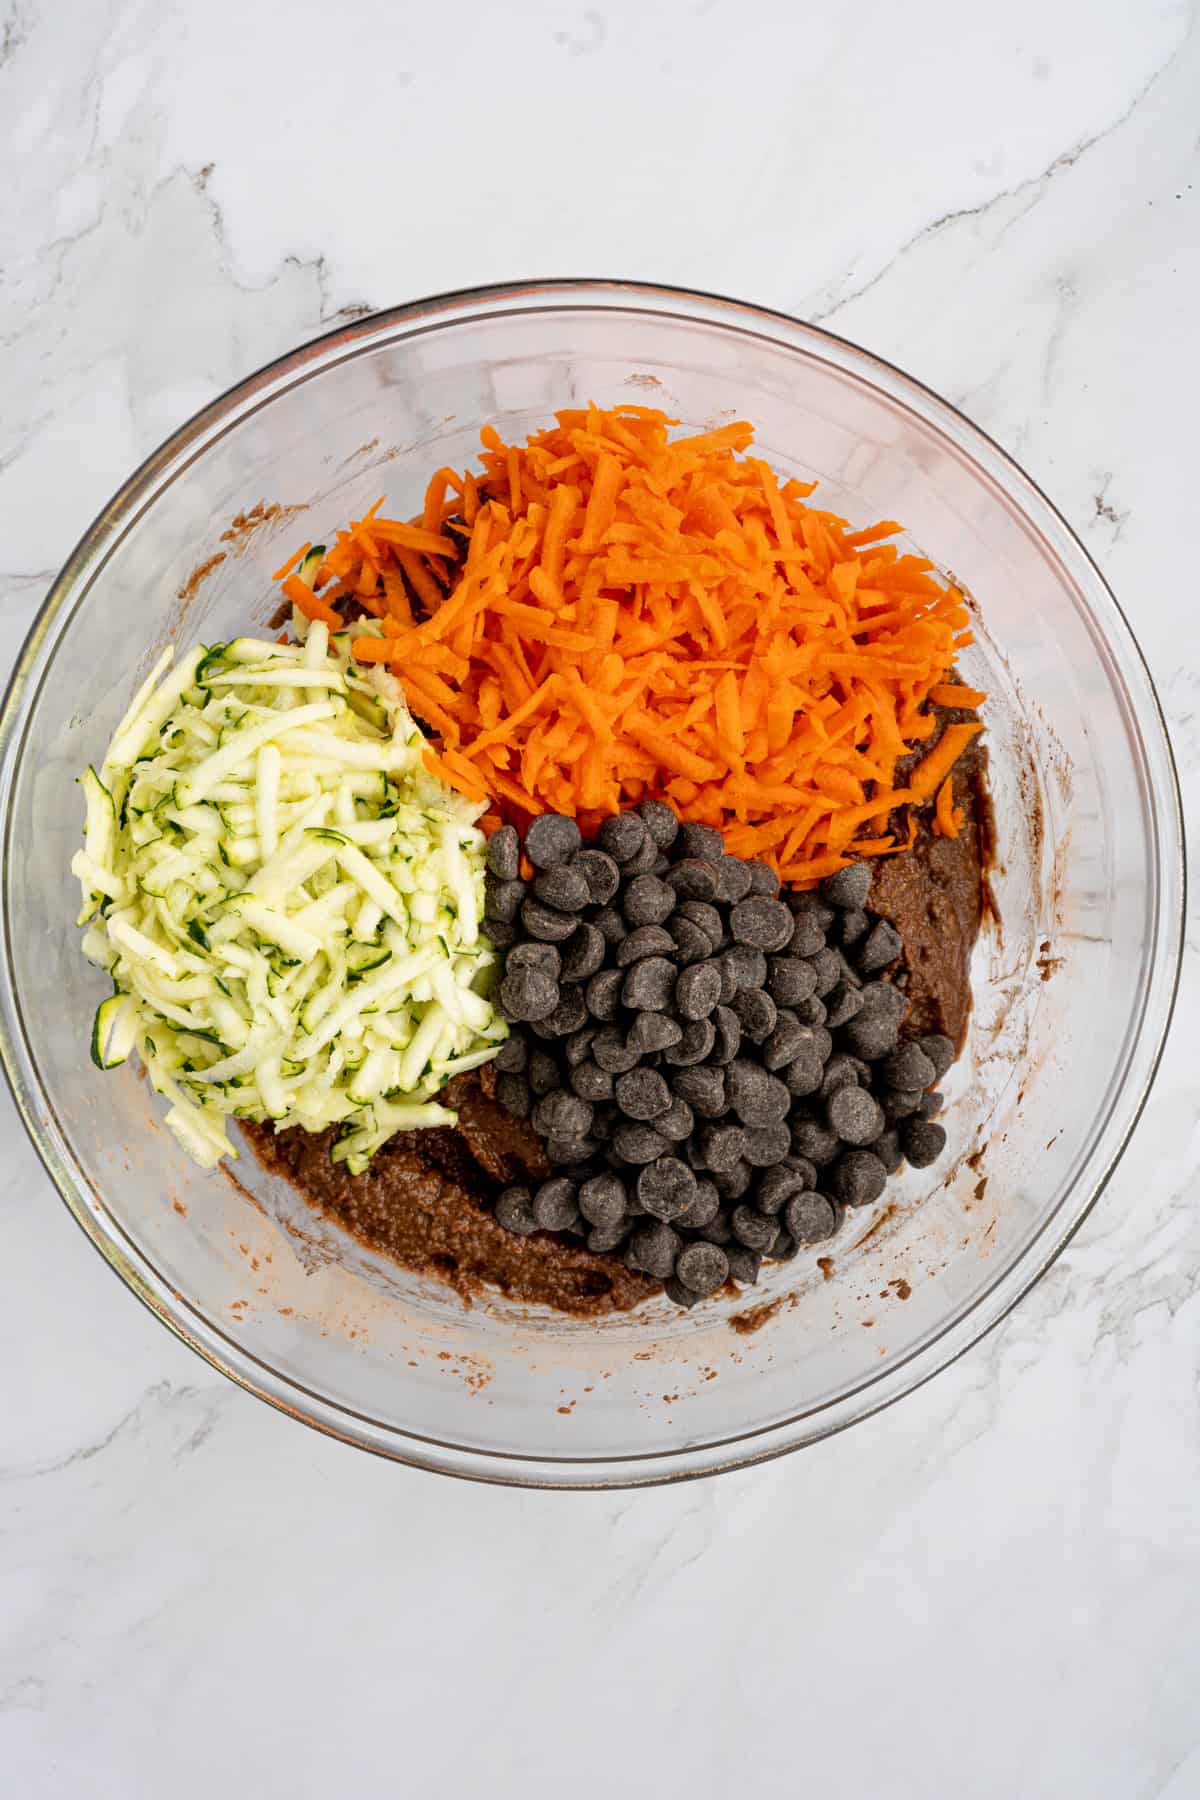 zucchini, carrot and chocolate chips added to batter.